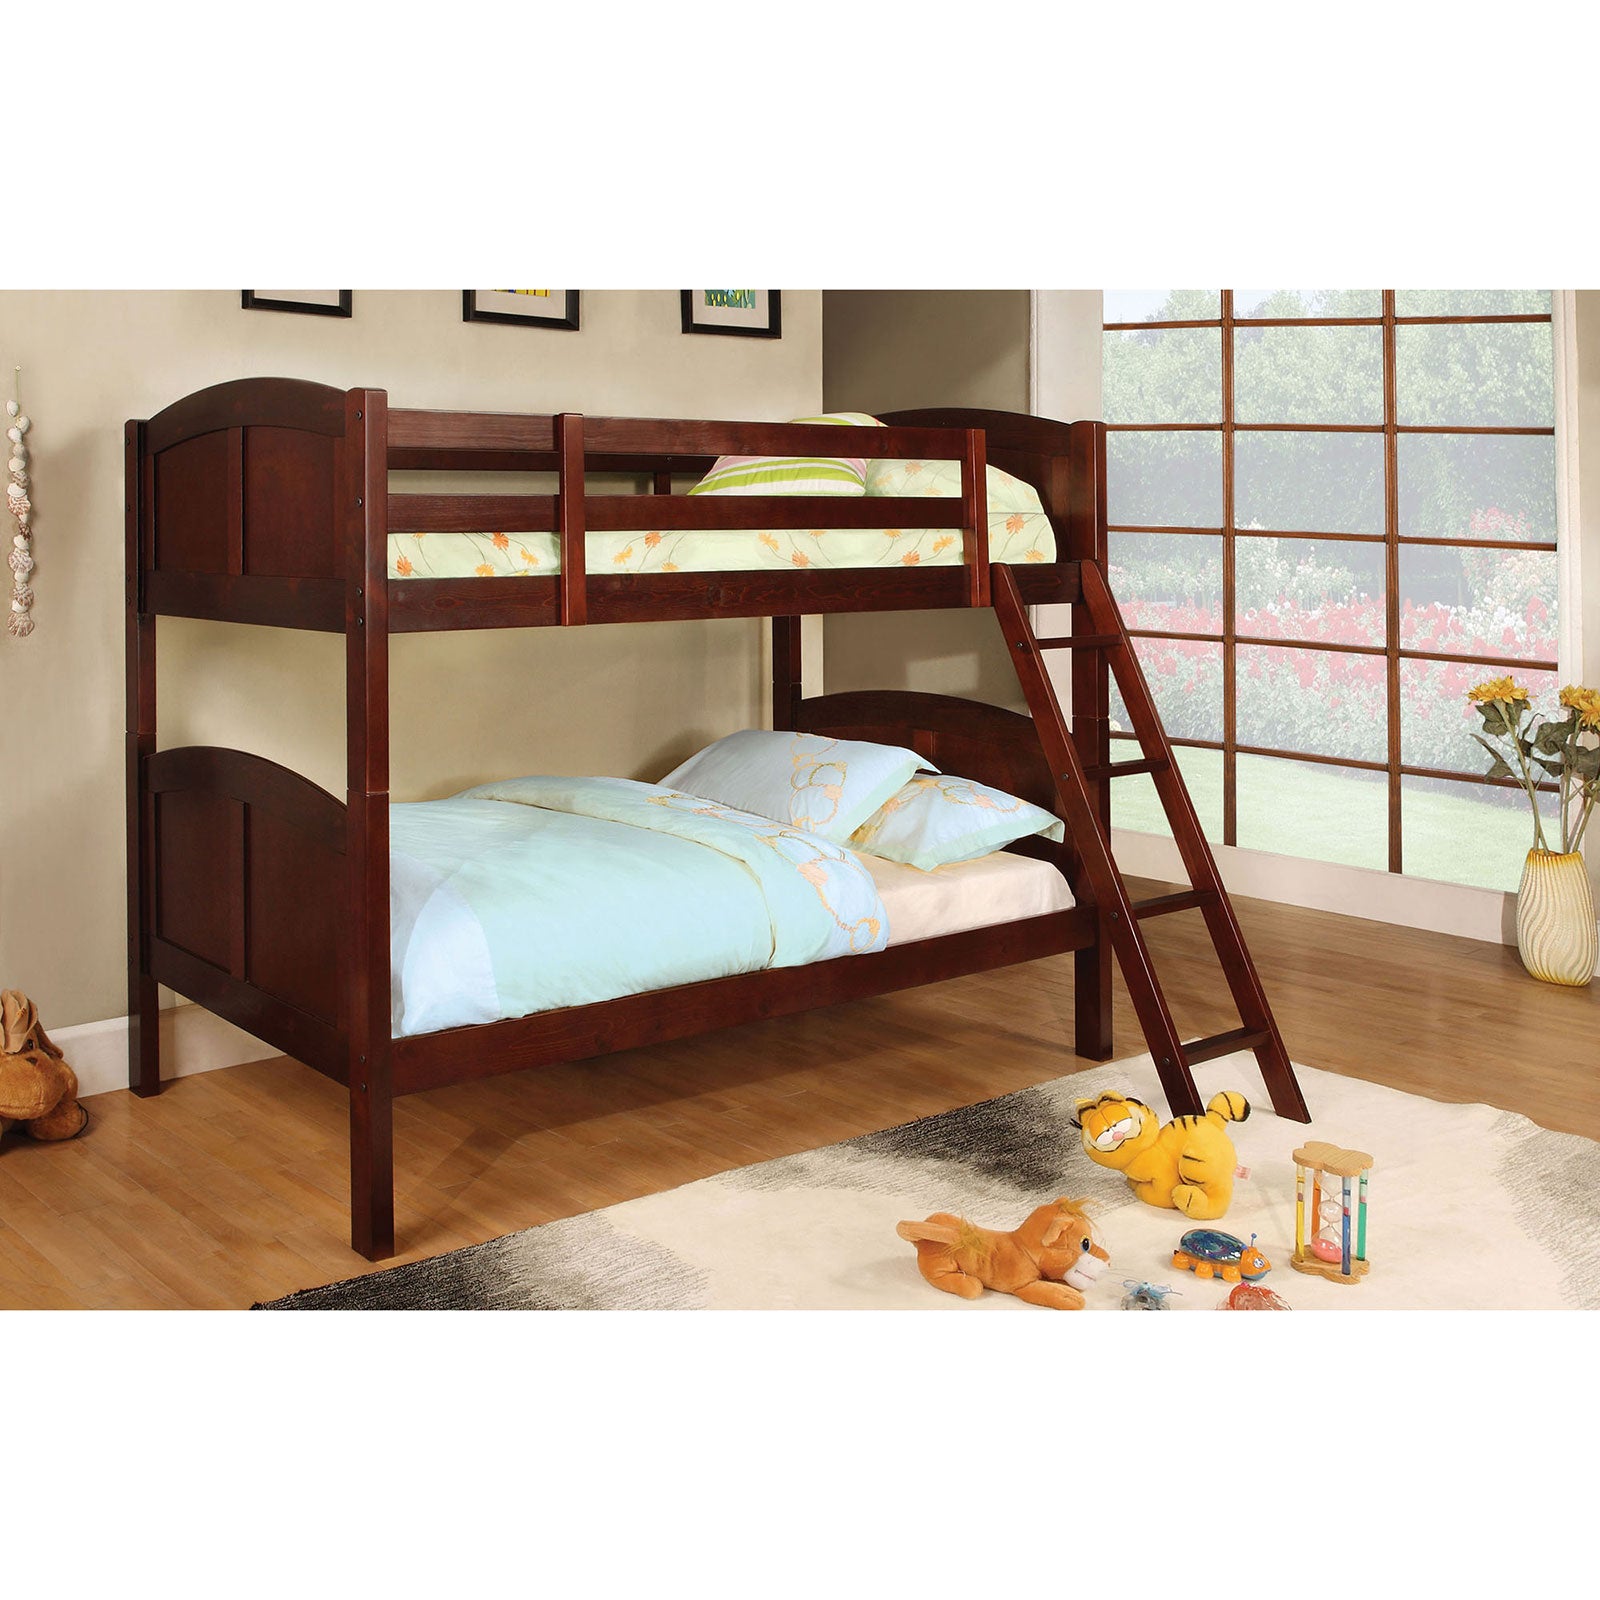 Rexford Cherry Twin/Twin Bunk Bed image